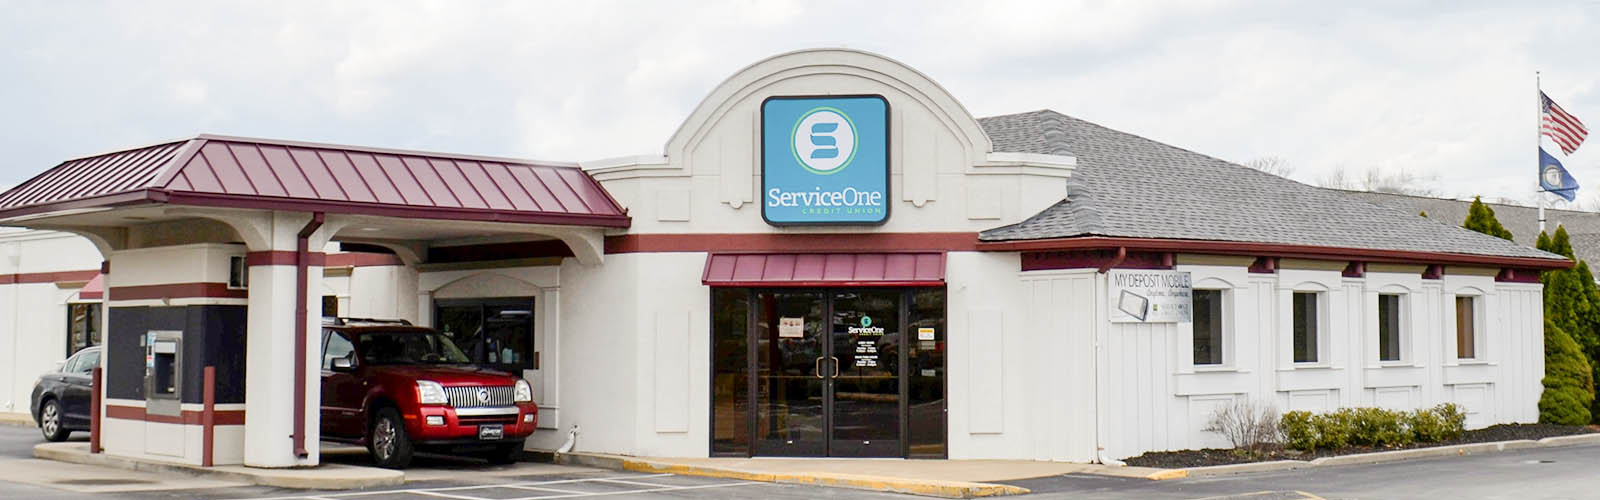 Service One Credit Union - ByPass, Bowling Green